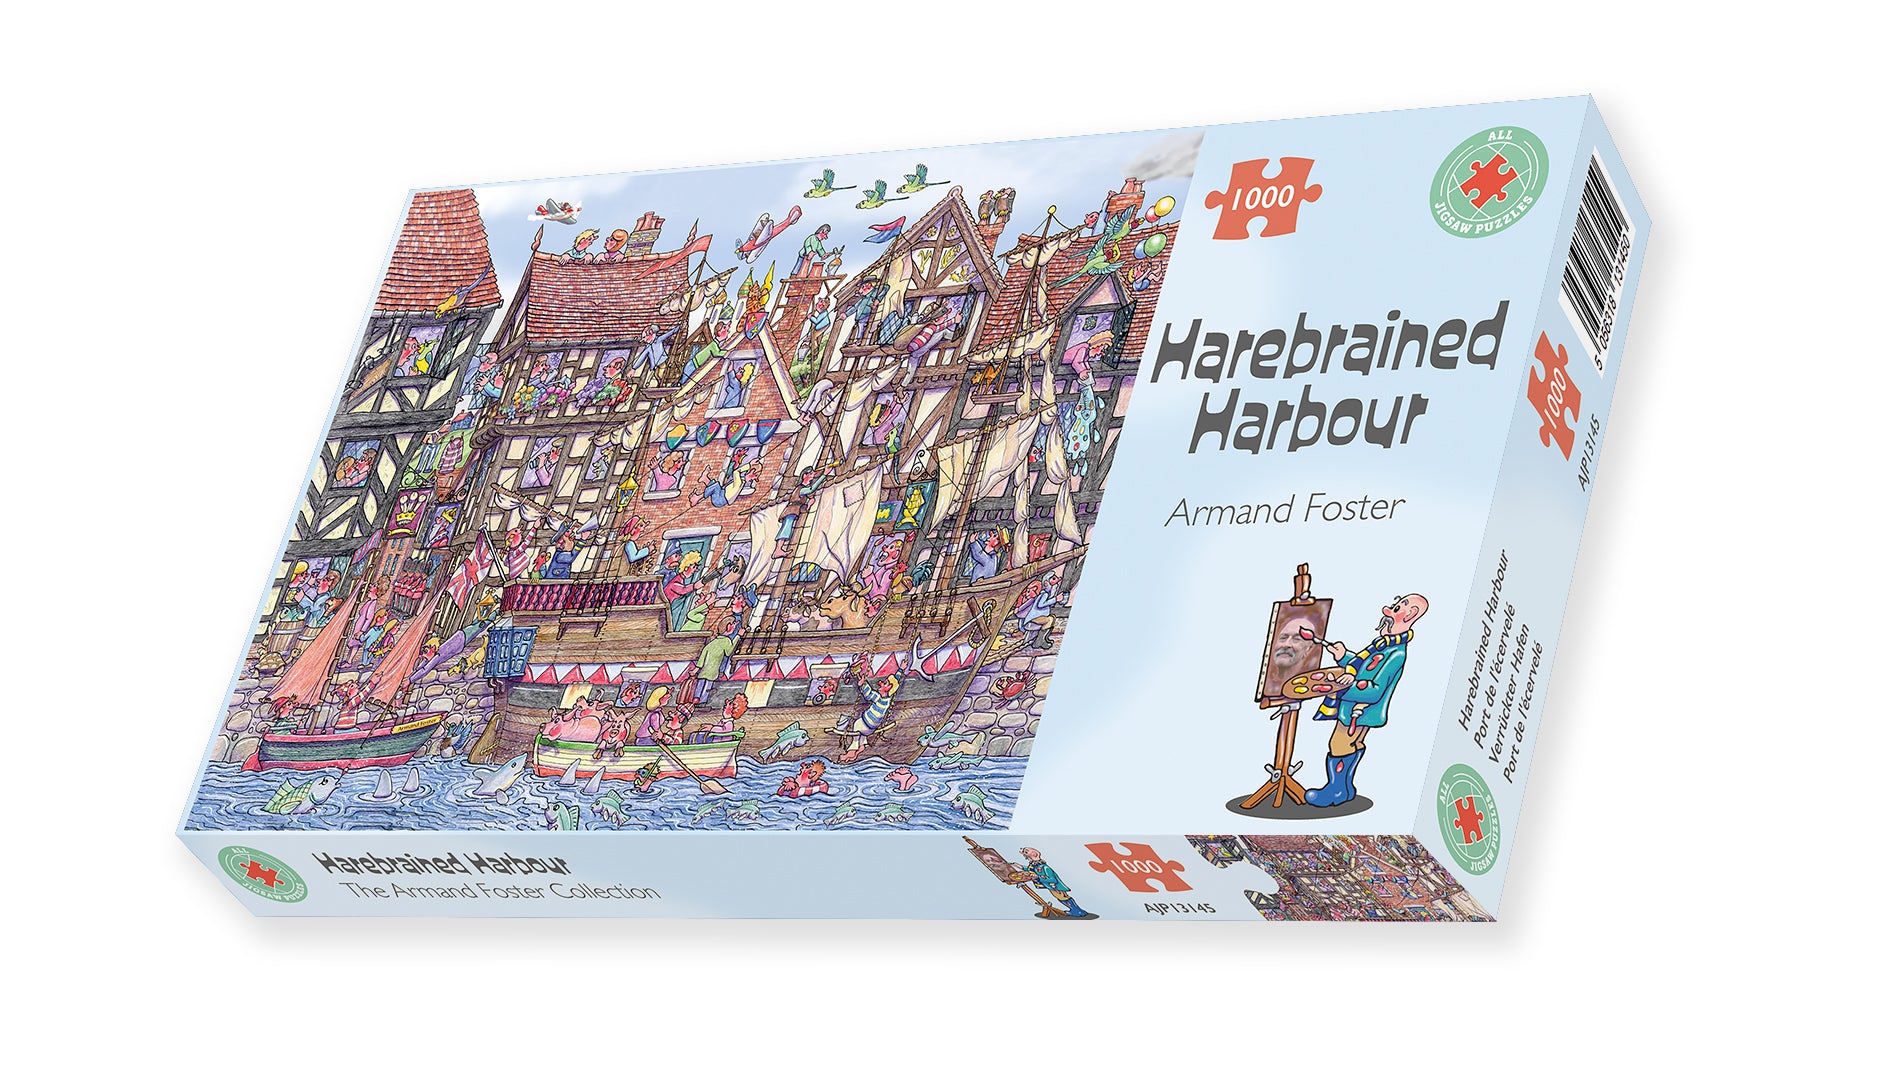 Harebrained Harbour 1000 Piece Jigsaw Puzzle box